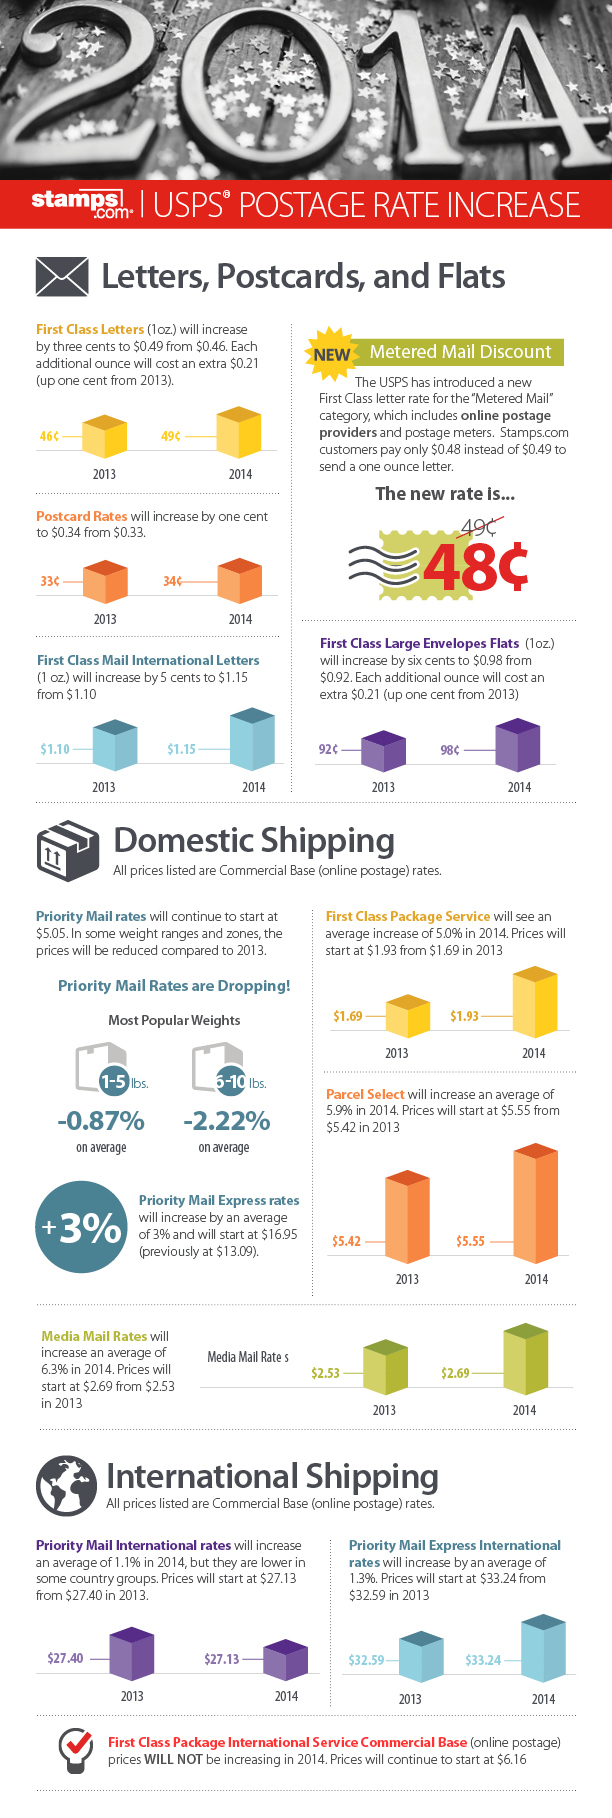 [Infographic] 2014 USPS Postage Rate Increase